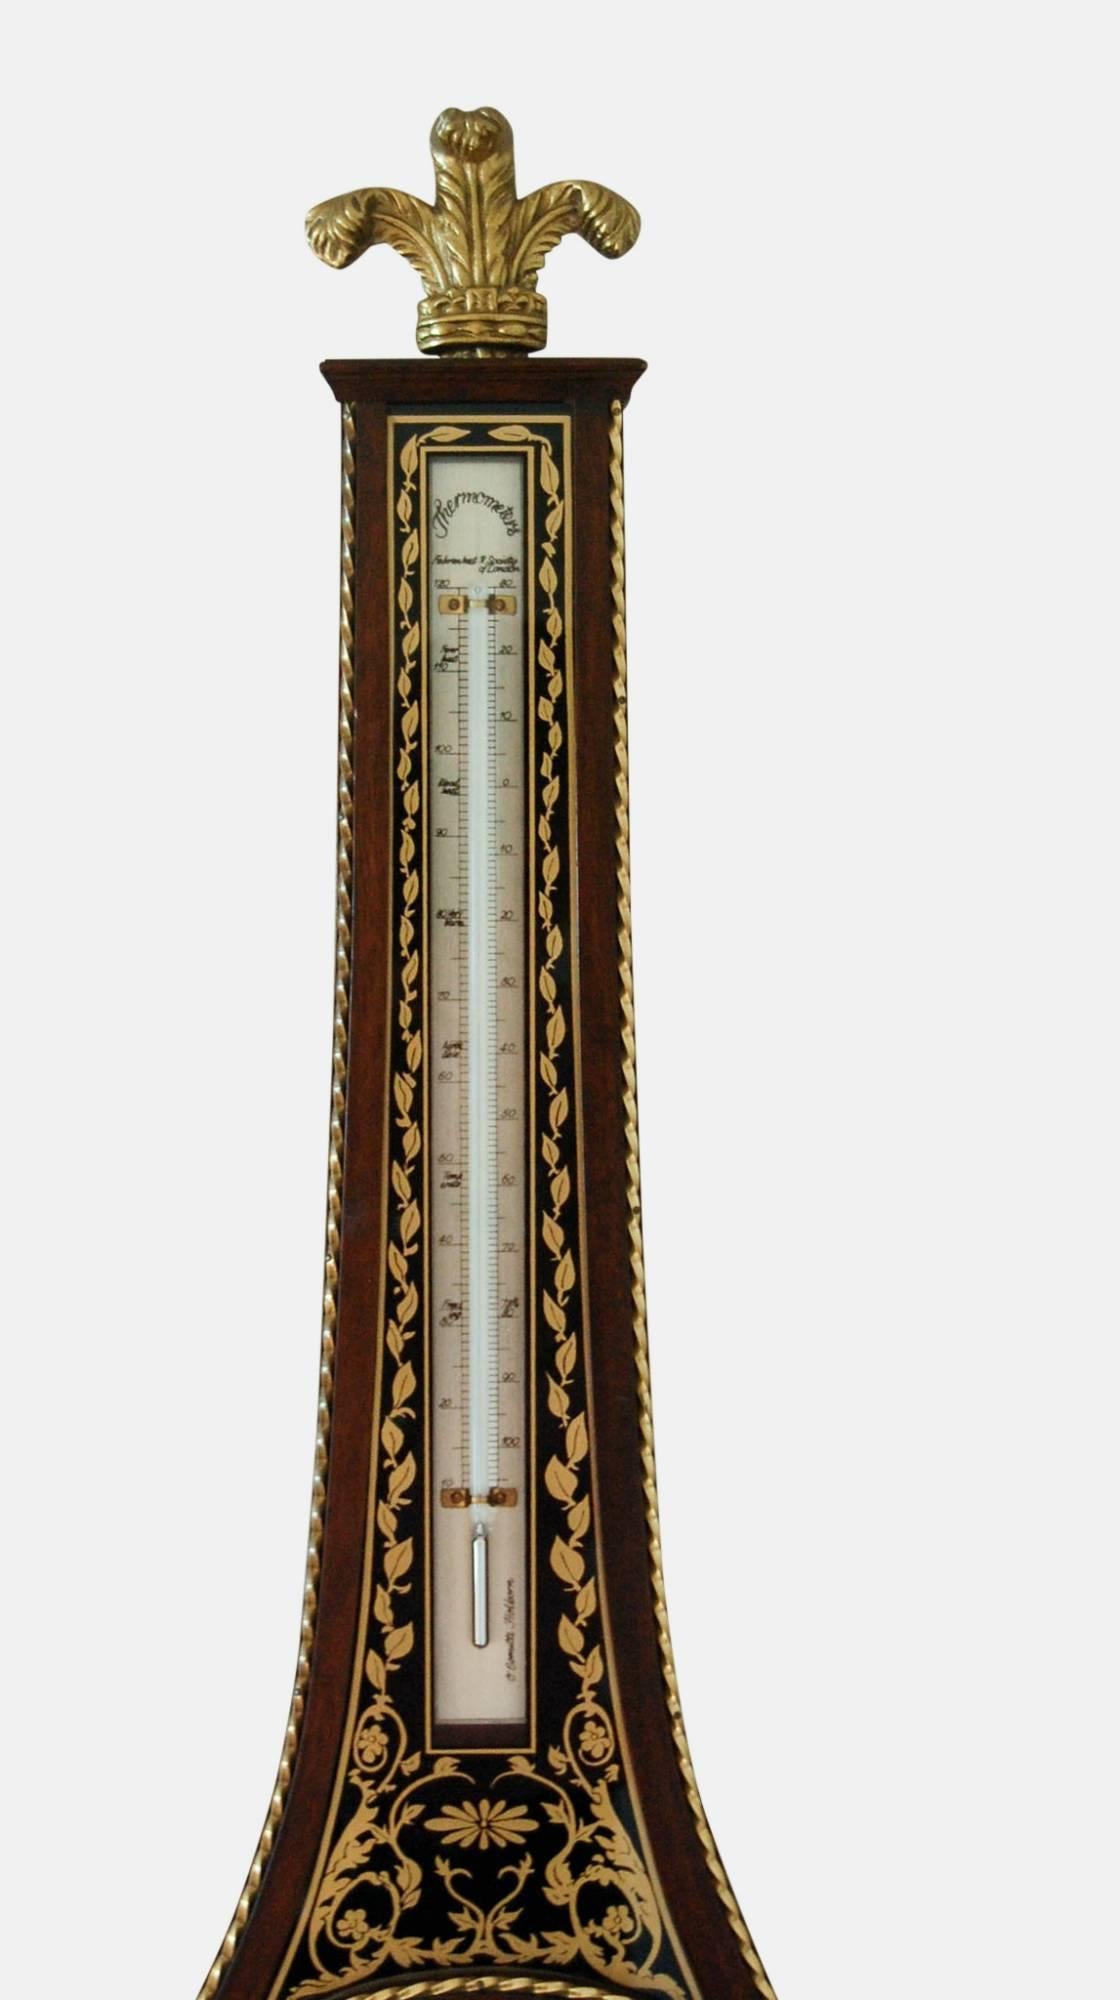 An aneroid wheel barometer made to commemorate the marriage of Charles and Diana by Garrard & Committi.